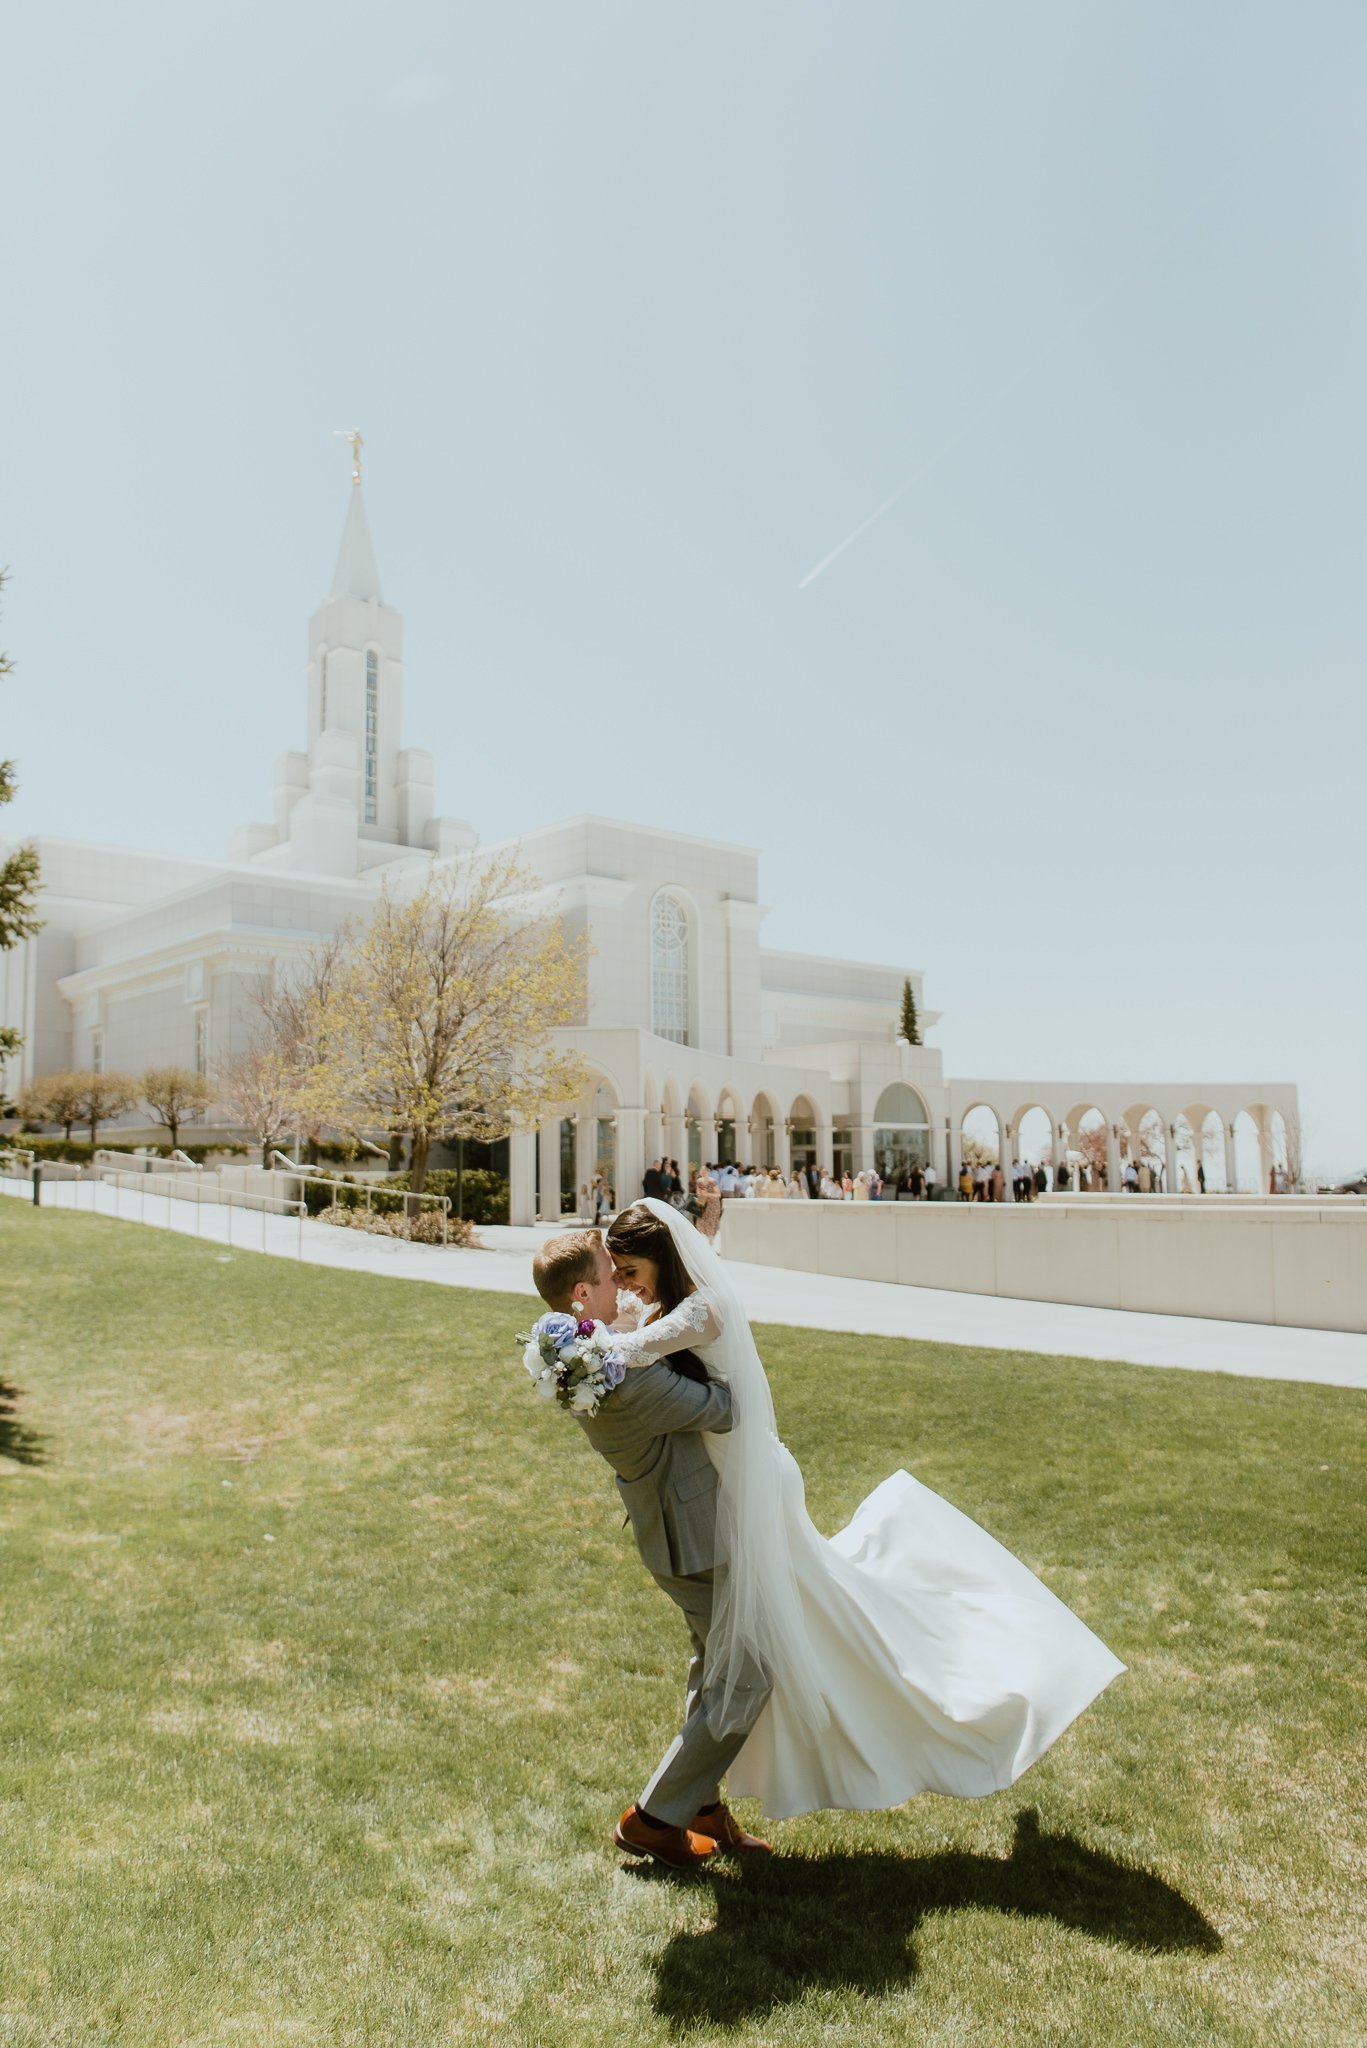 Utah-State-Capitol-Spring-Blossons-Bountiful-LDS-Wedding-Hopesandcheers-photo-54